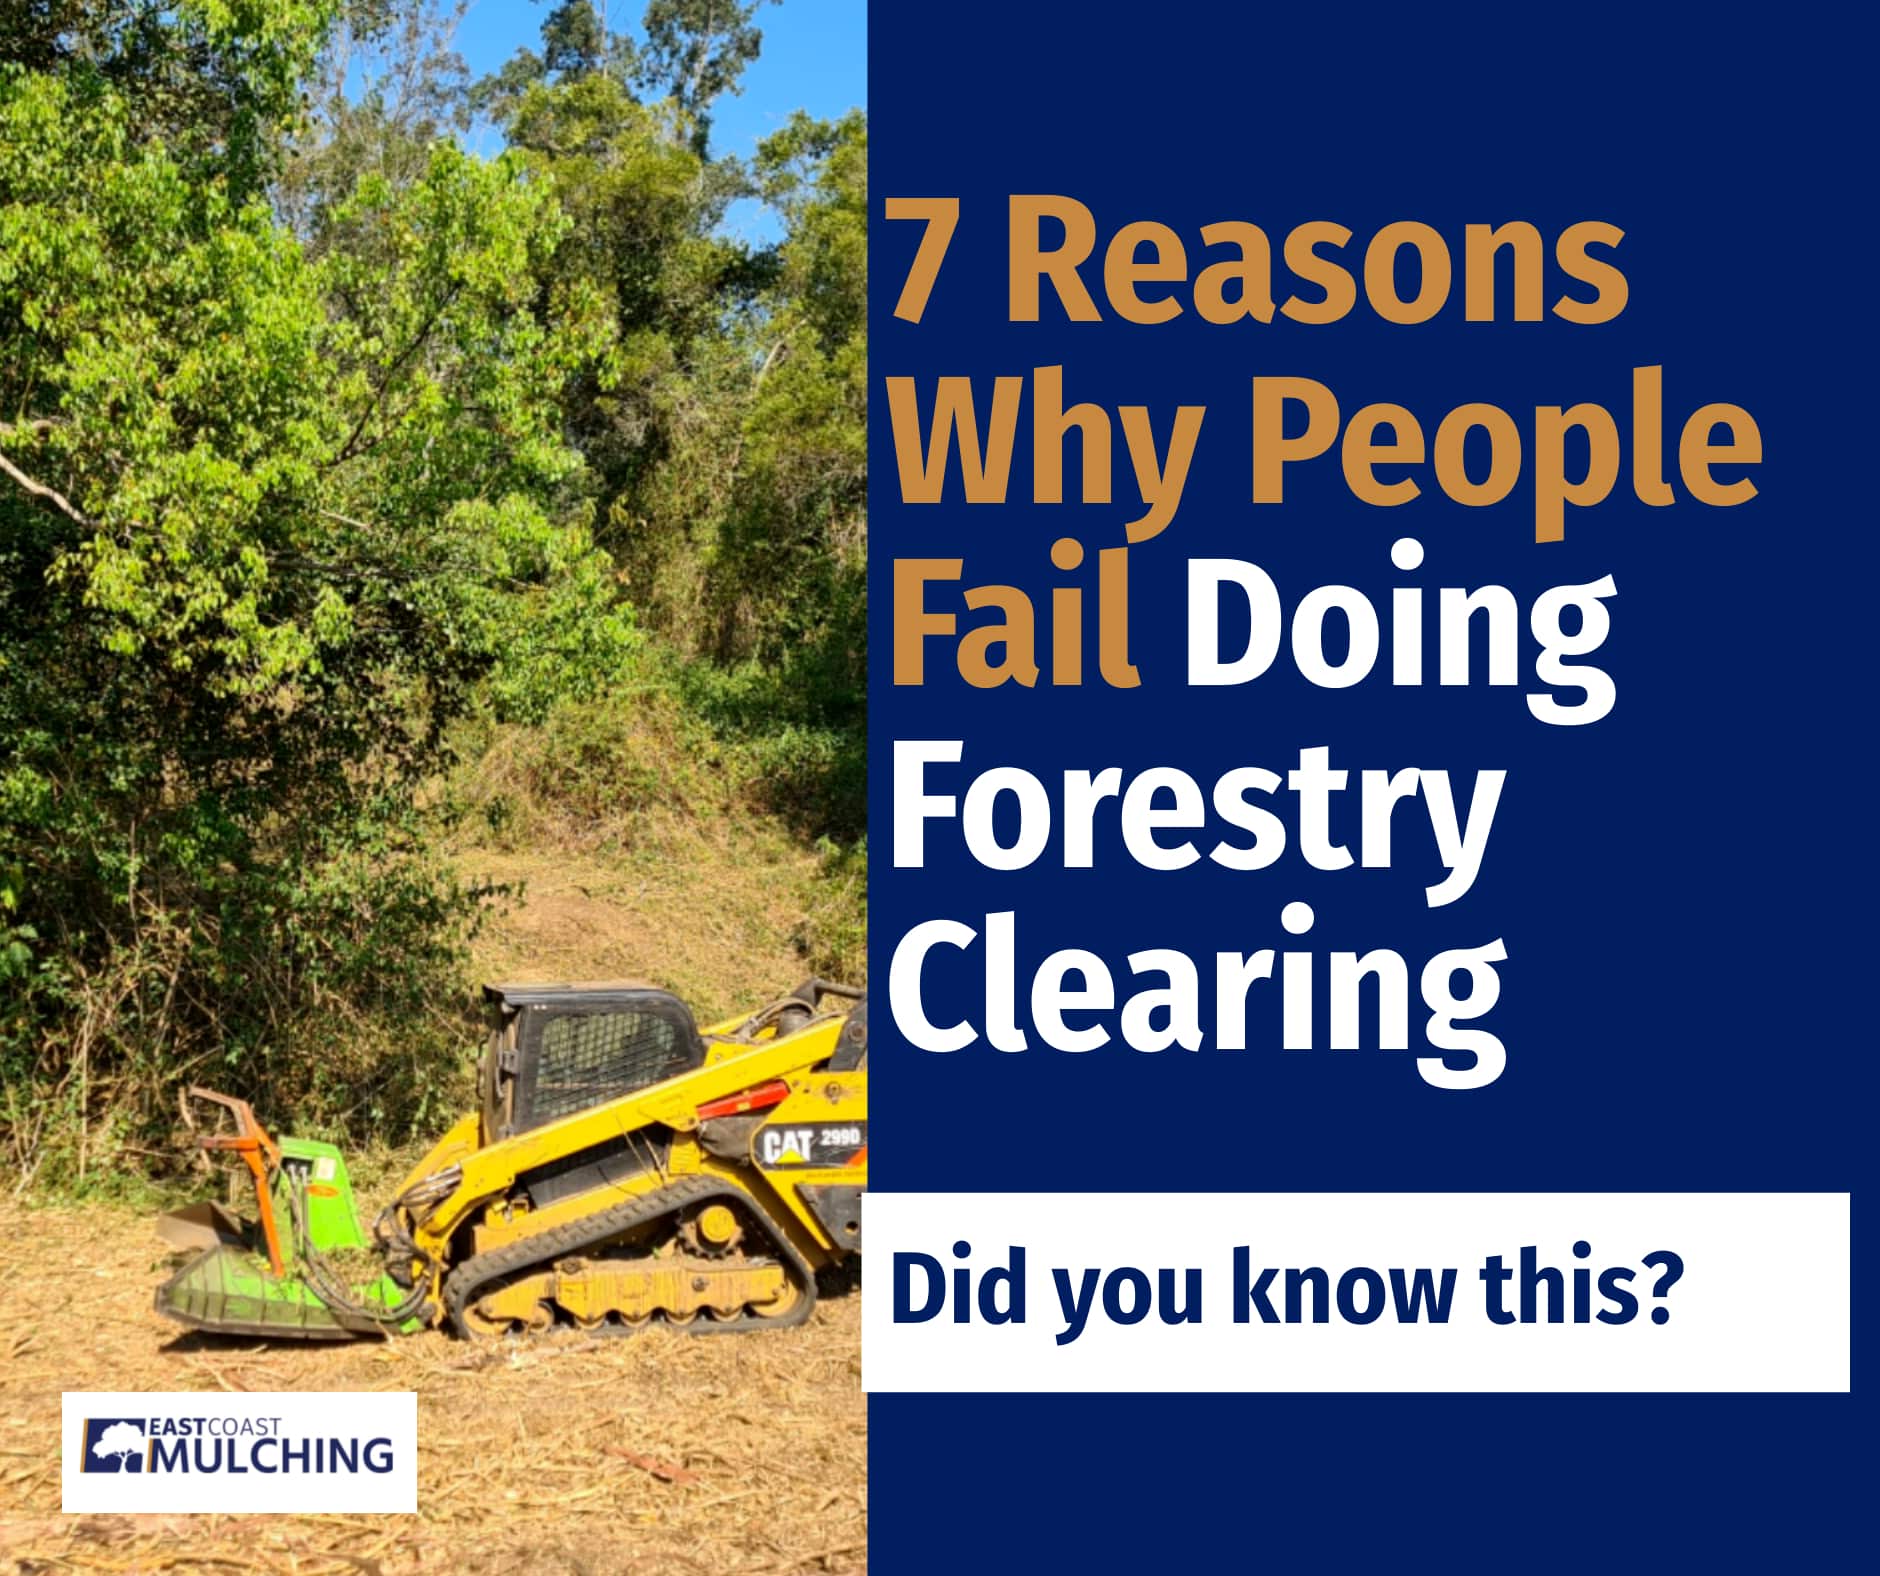 7 Reasons Why People Fail Doing Forestry Clearing